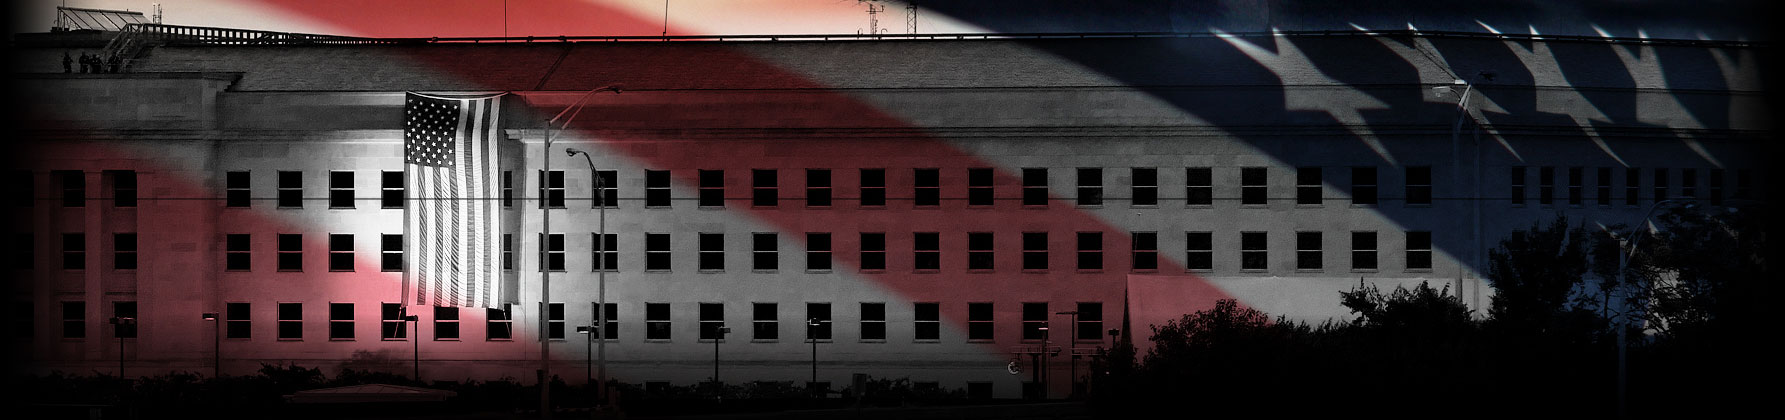 a photograph of the Pentagon, overlaid with the American flag